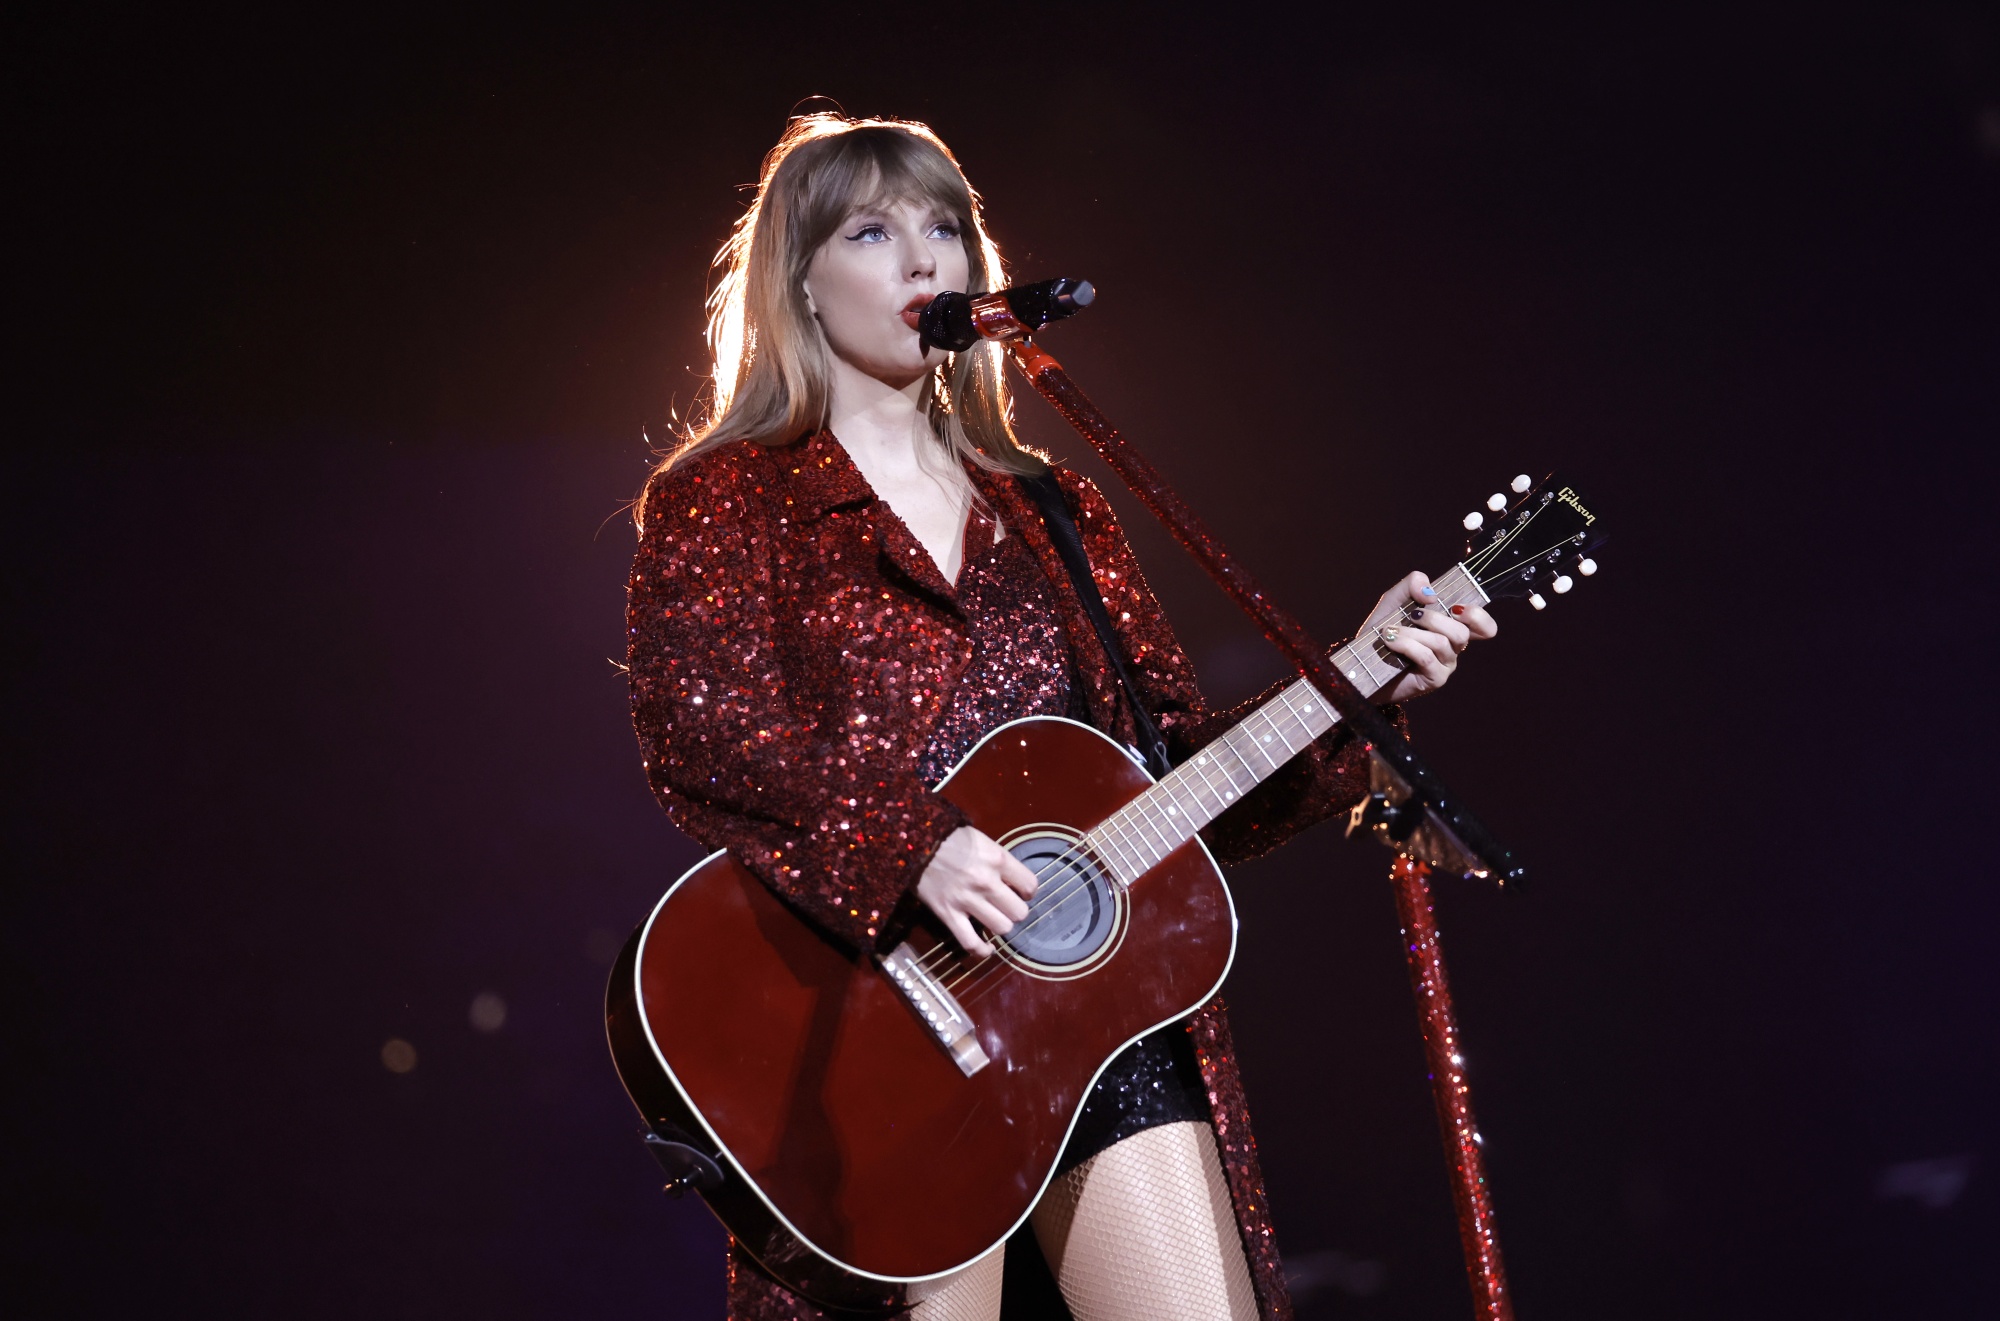 Taylor Swift Eras Tour Helps Boost Las Vegas Tourism to Pre-Covid Levels -  Bloomberg